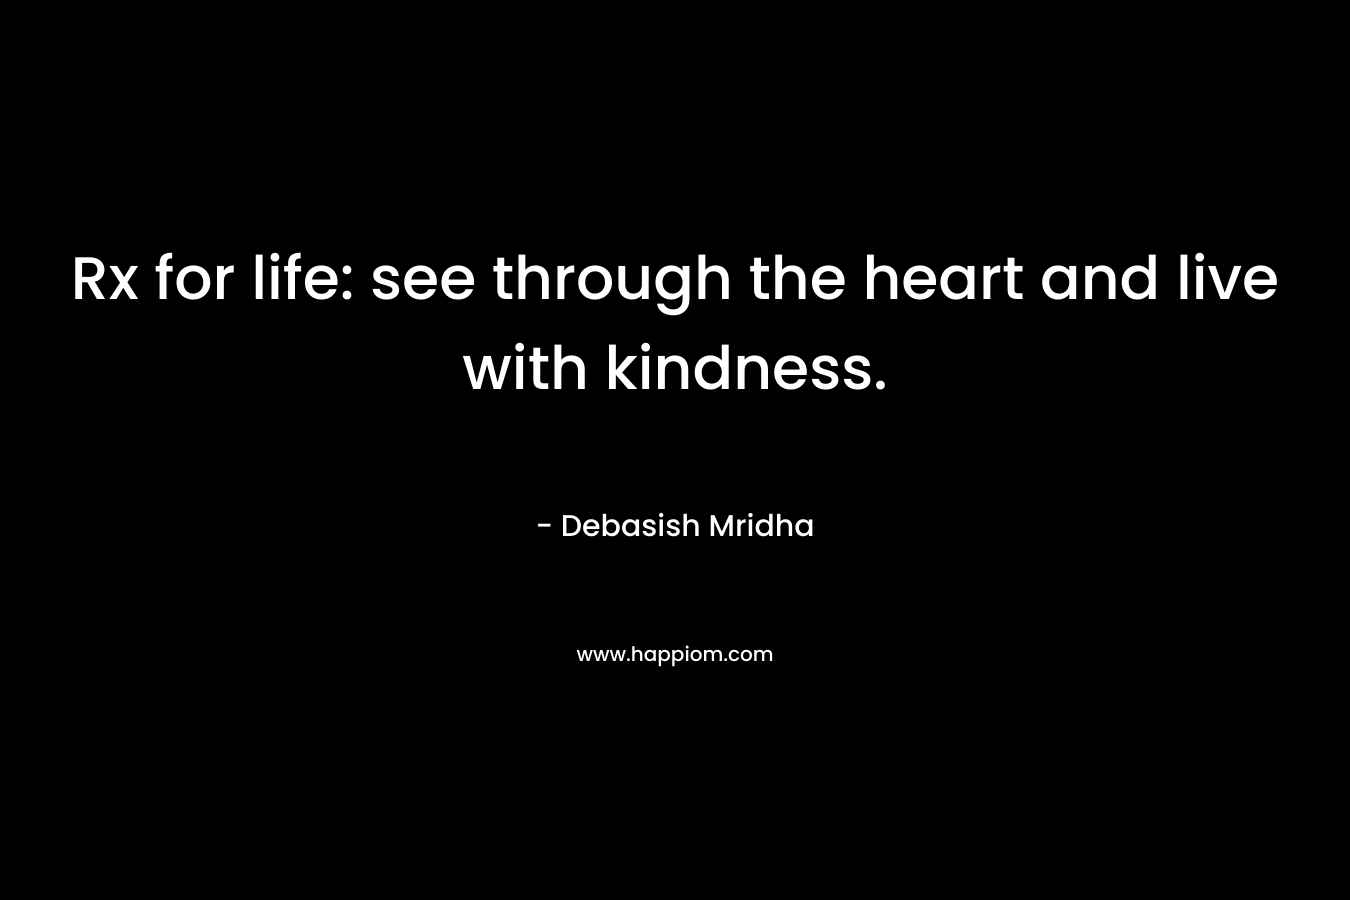 Rx for life: see through the heart and live with kindness.